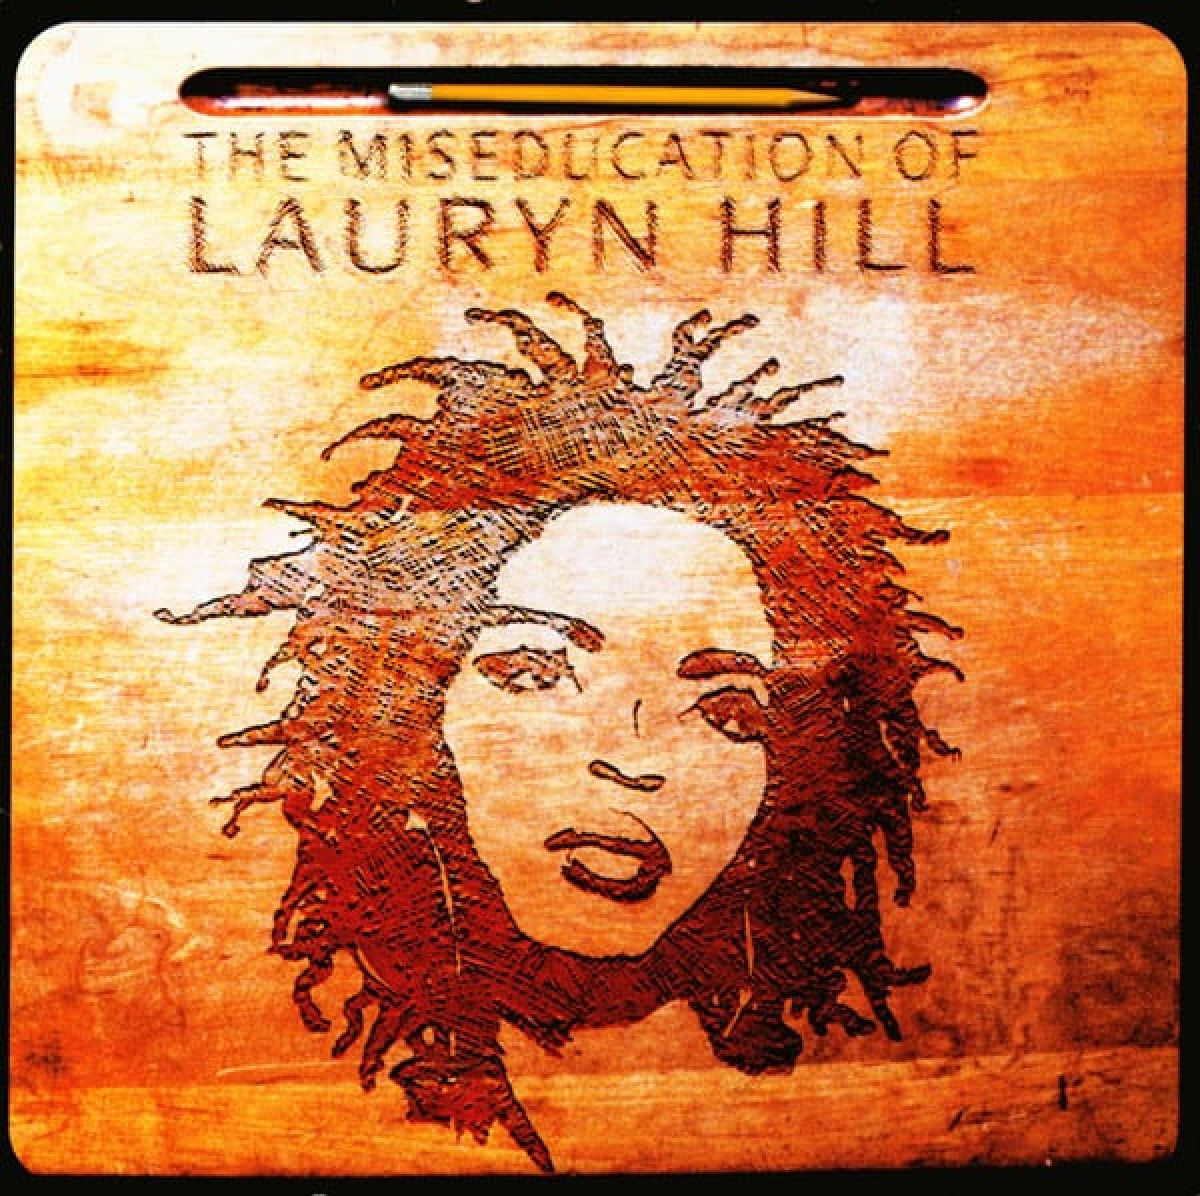 Record Reappraisal: The Miseducation of Lauryn Hill